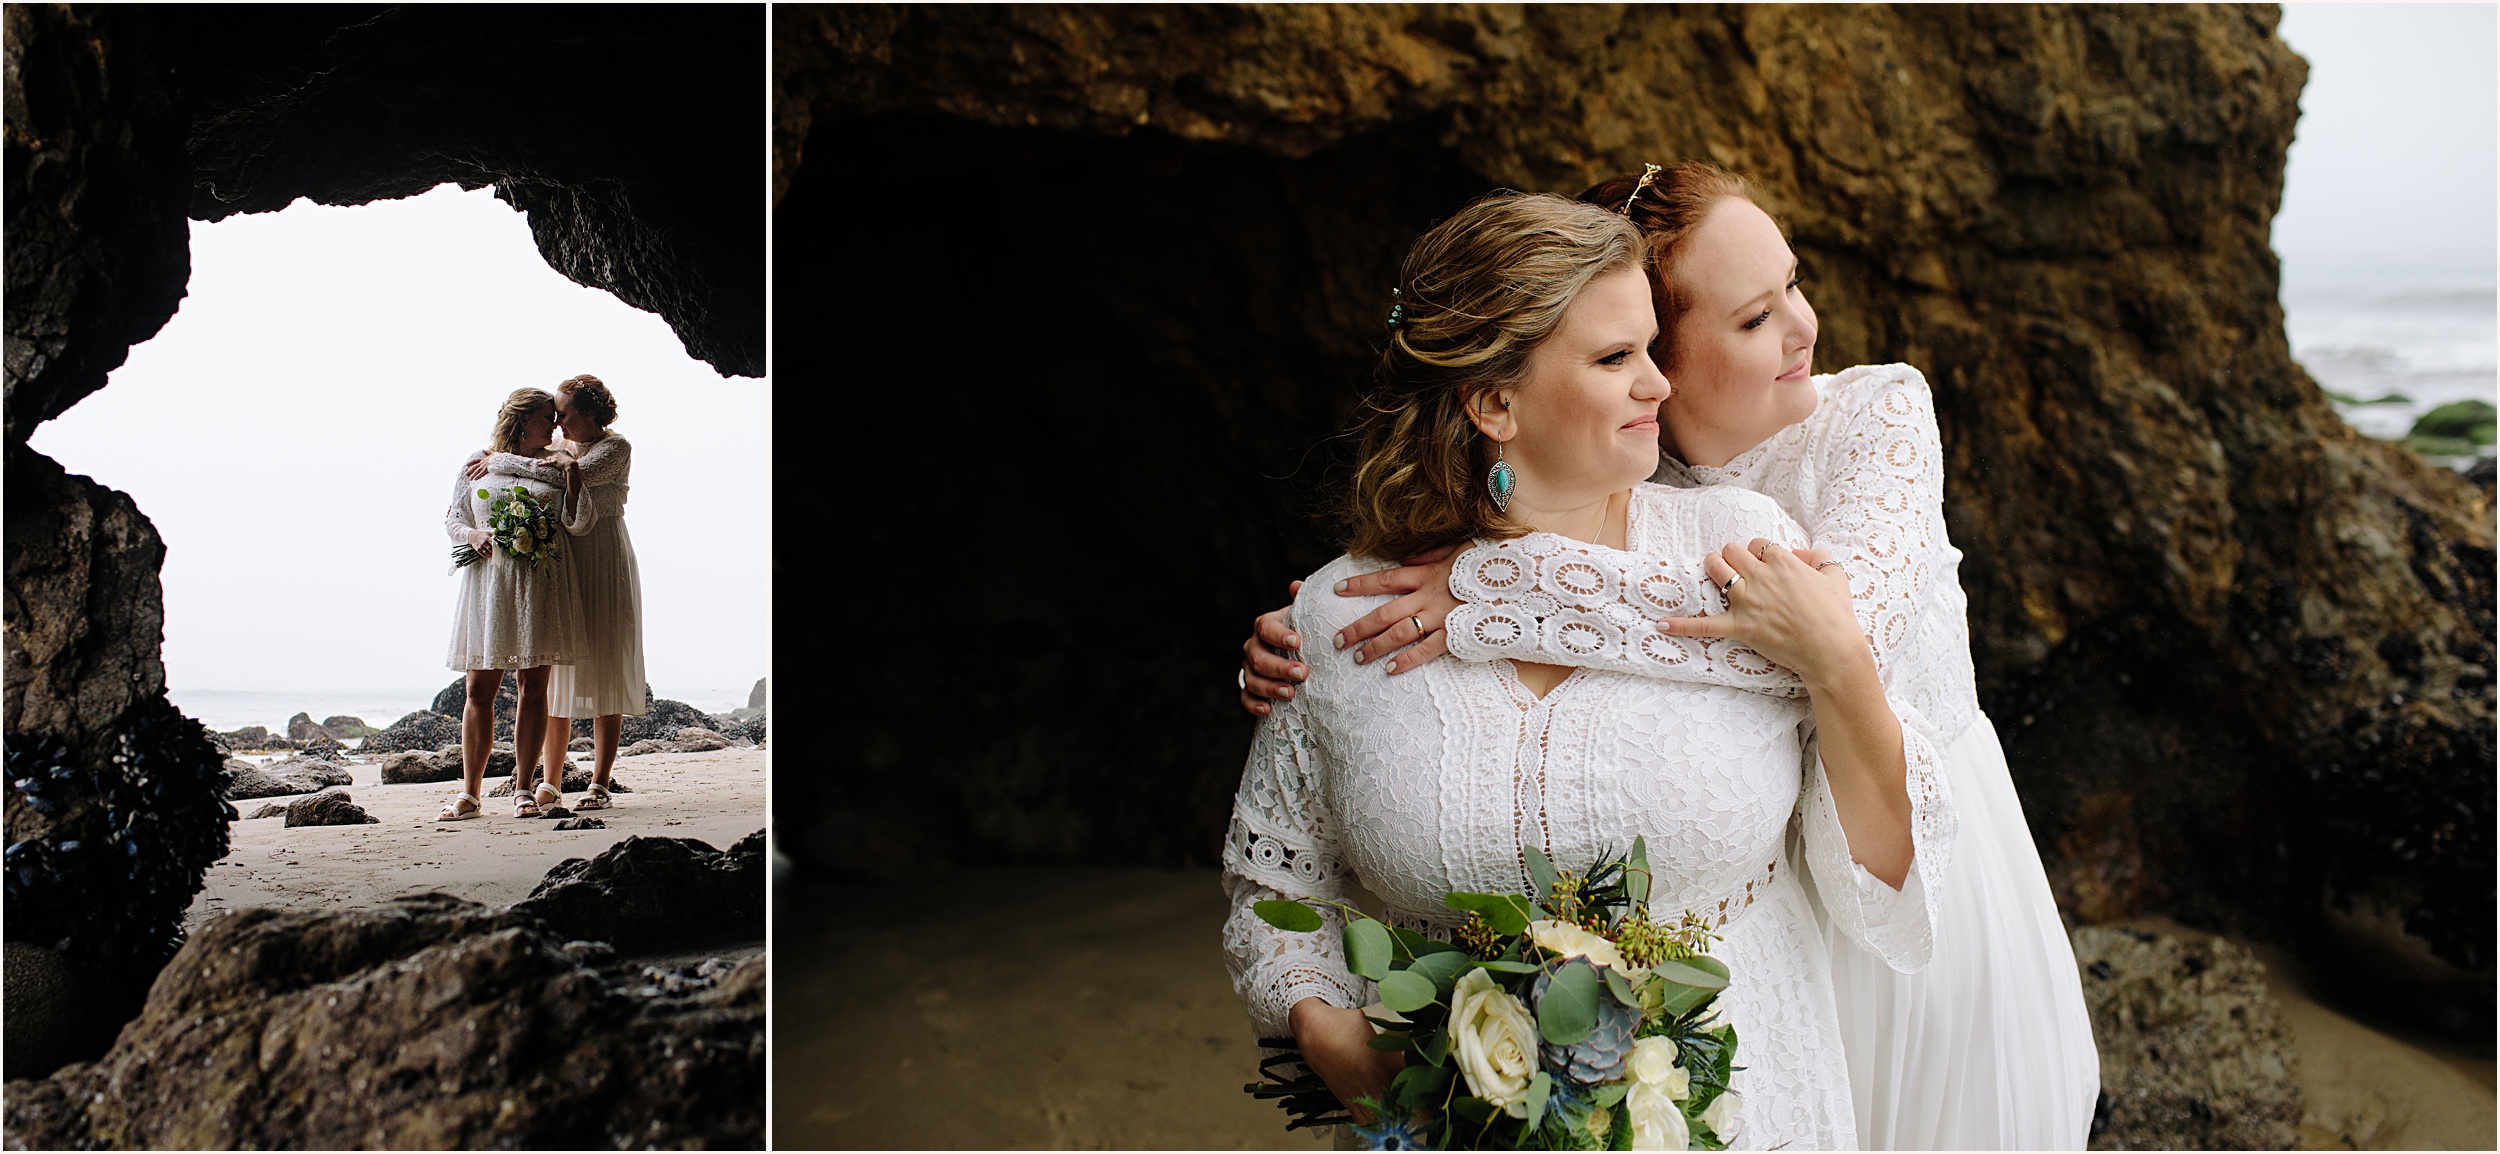 Photo of brides in stunning white lace elopement dresses at El Matador beach cave